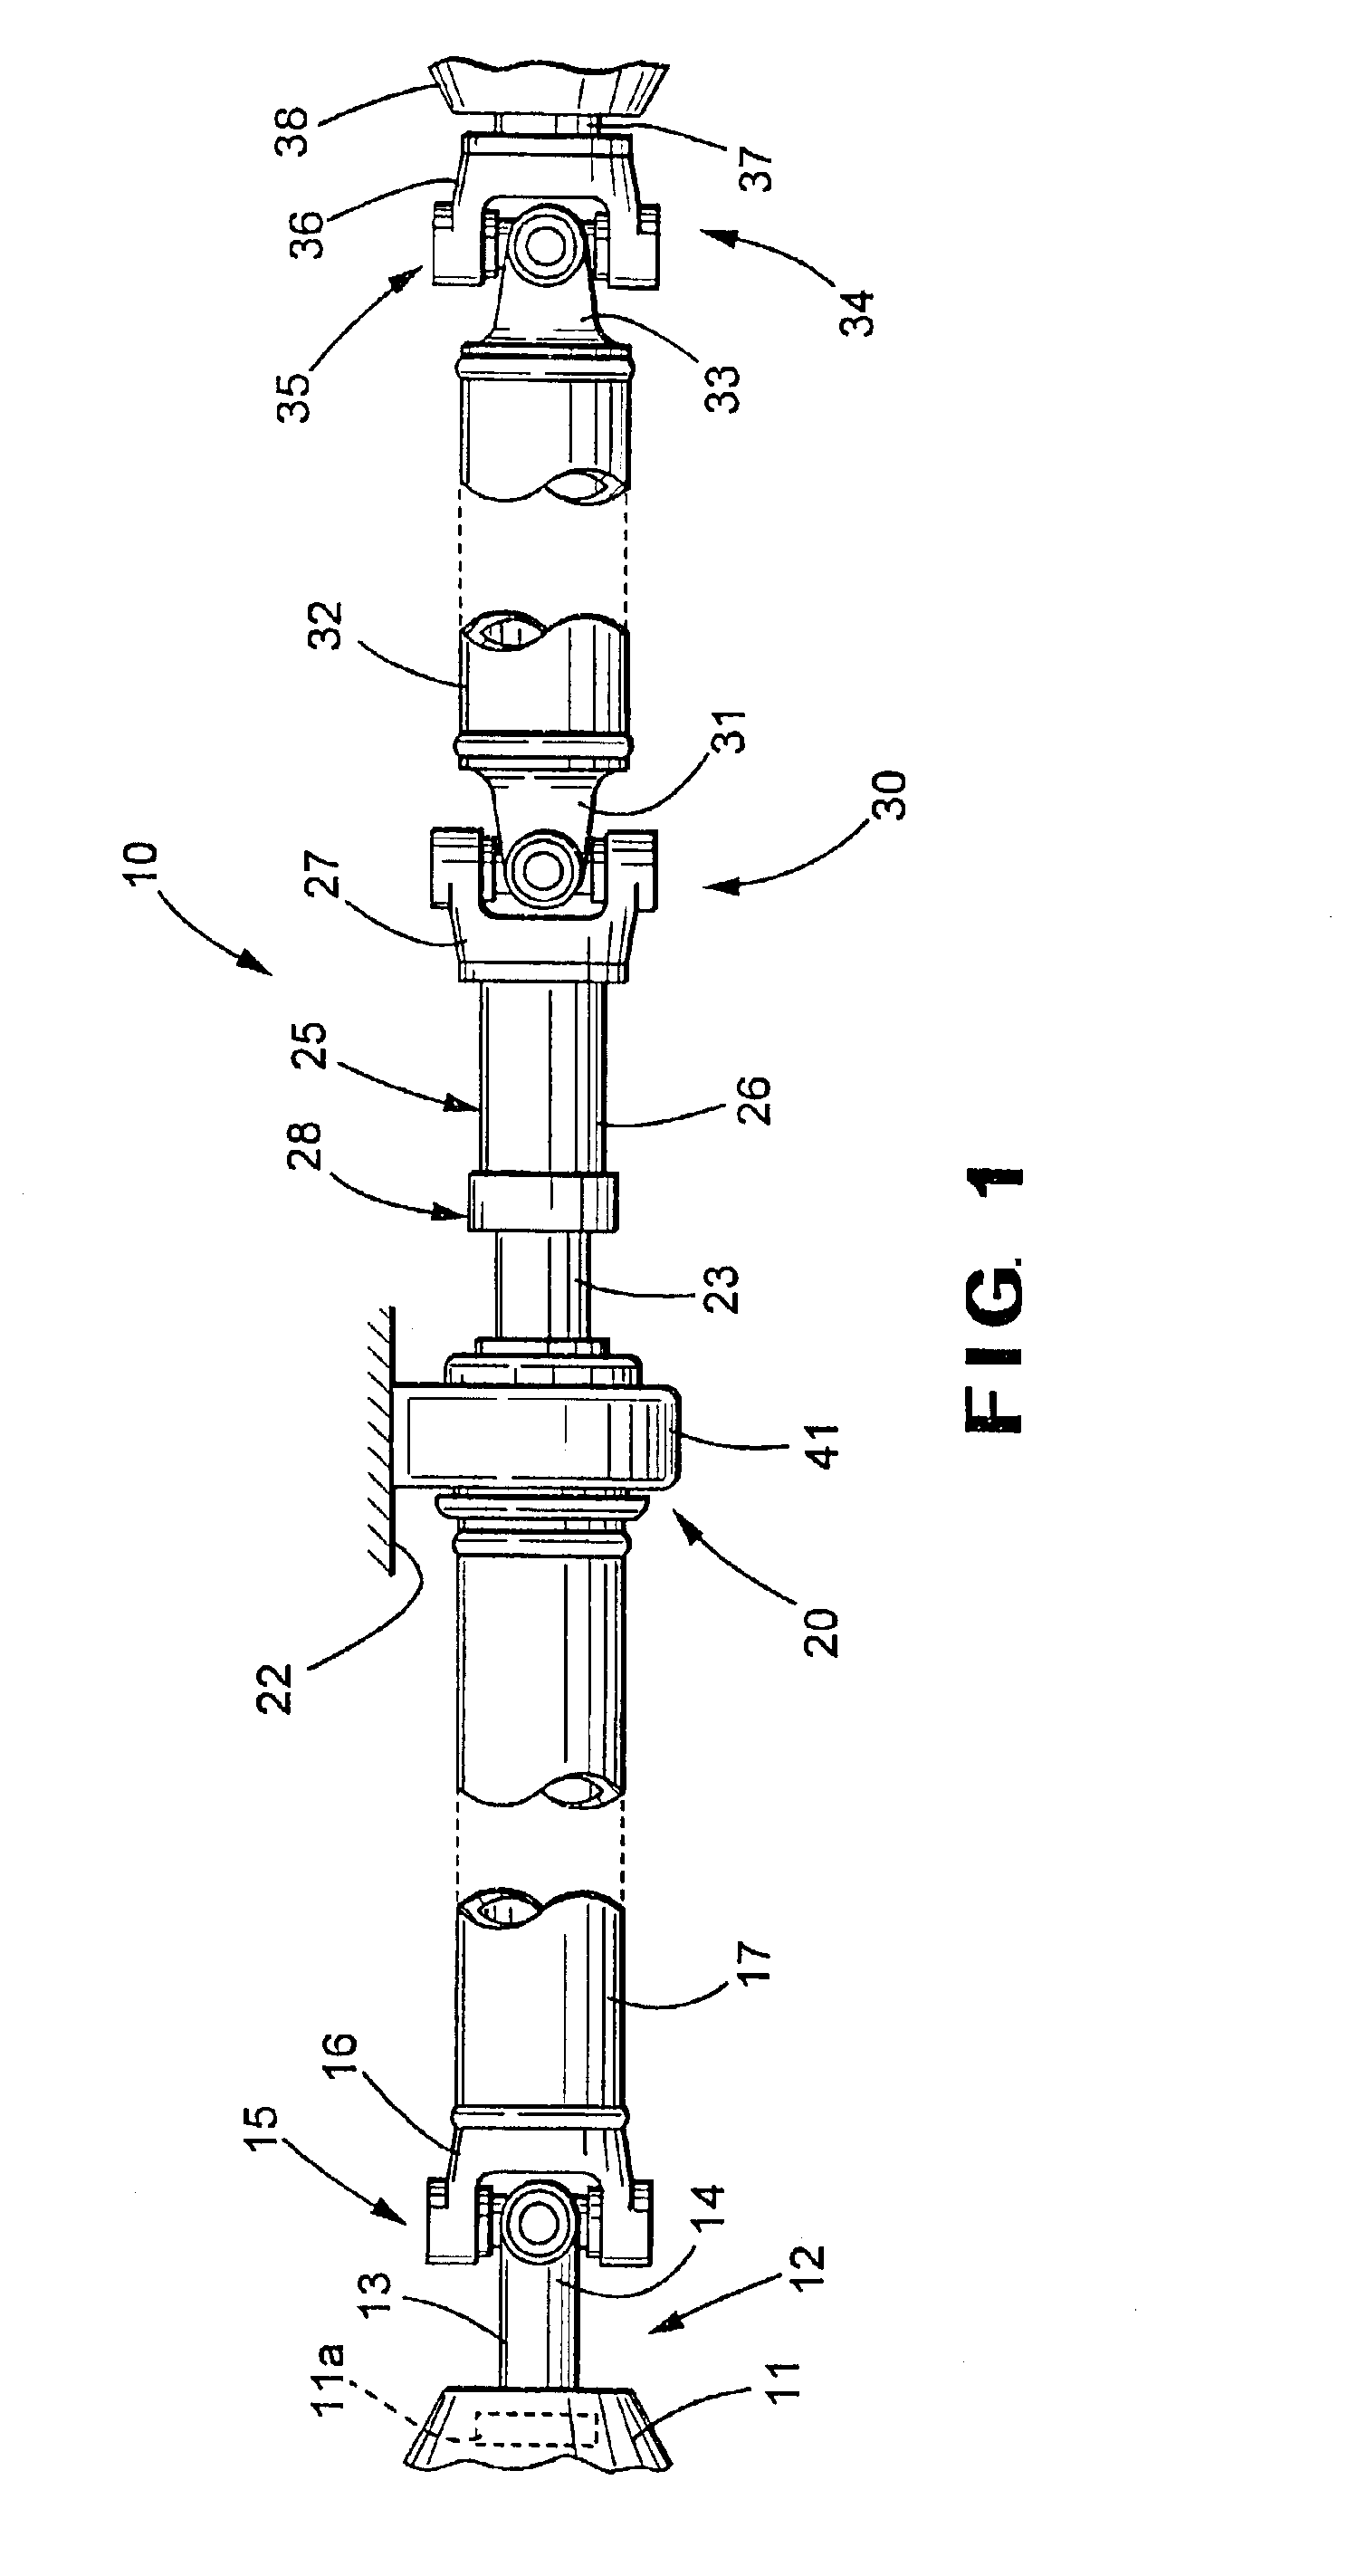 Center bearing assembly including a support member containing a rheological fluid